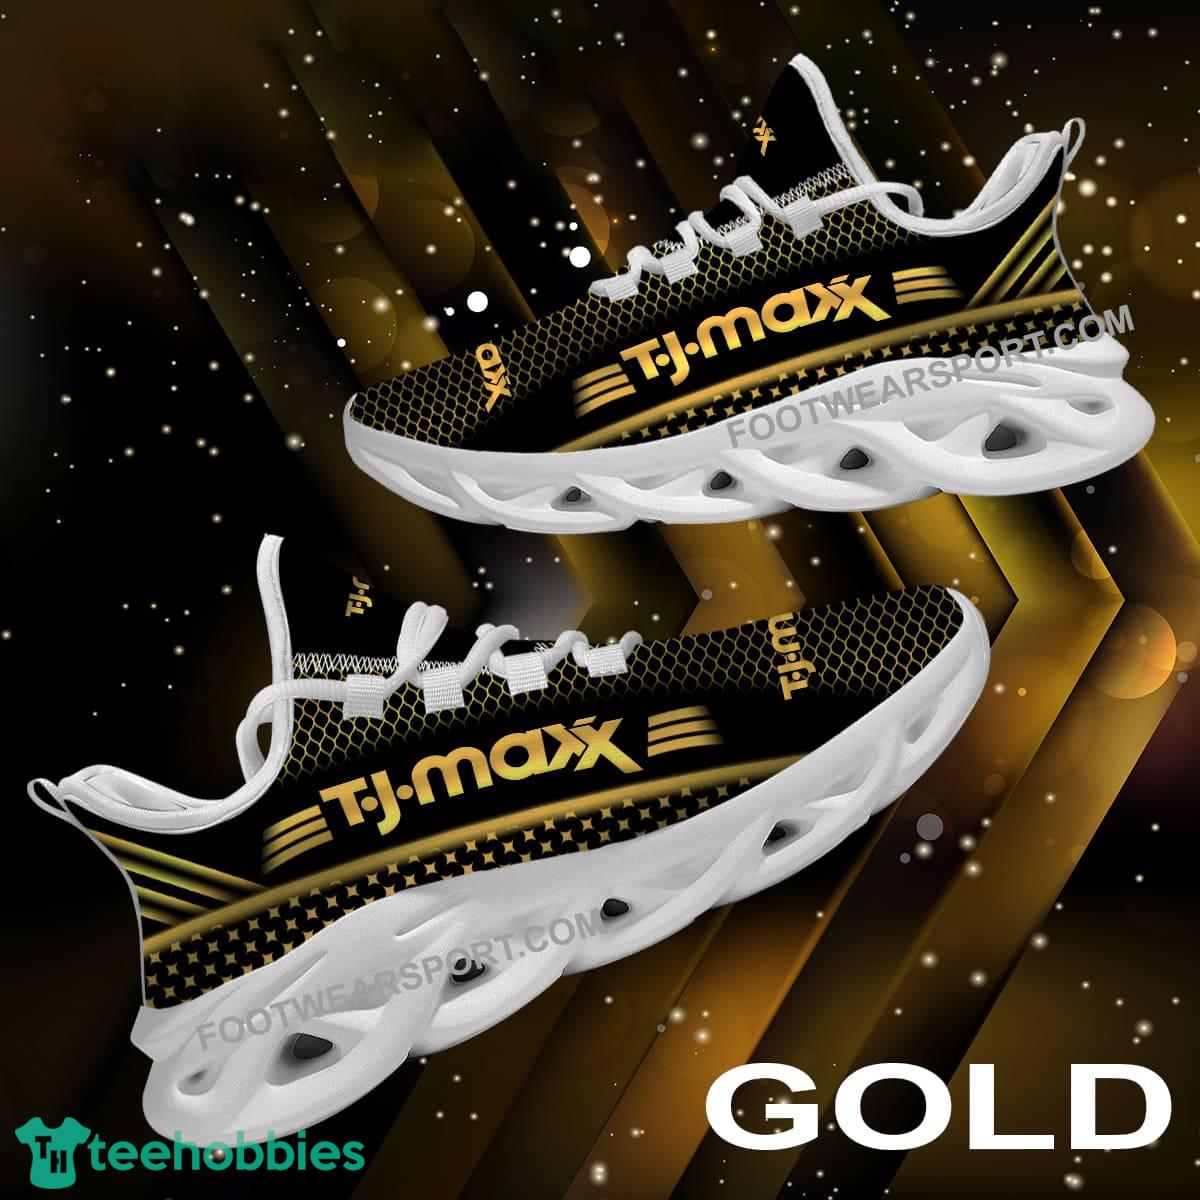 T.J. Maxx Max Soul Shoes Gold Chunky Sneaker Fashion-forward For Fans Gift - T.J. Maxx Max Soul Shoes Gold Chunky Sneaker Fashion-forward For Fans Gift